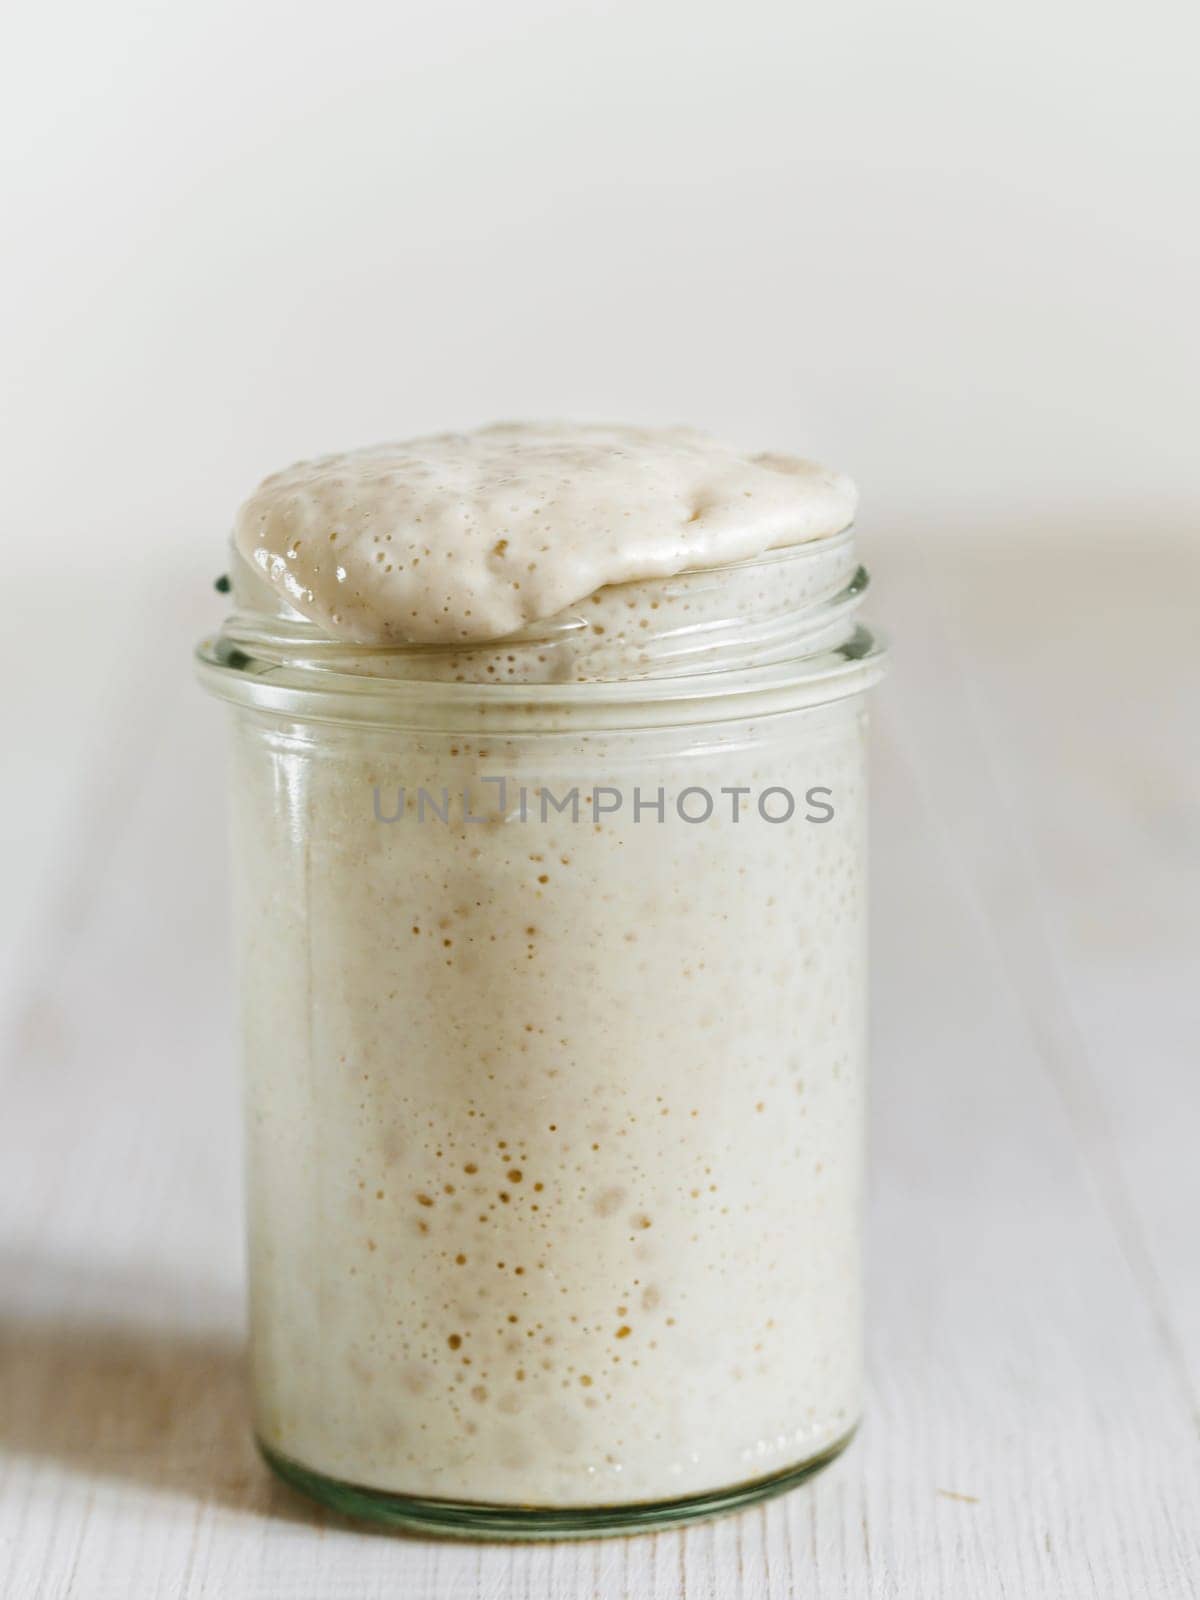 Wheat sourdough starter. Glass jar with sourdough starter on white wooden tabletop. Copy space for text or design. Vertical.